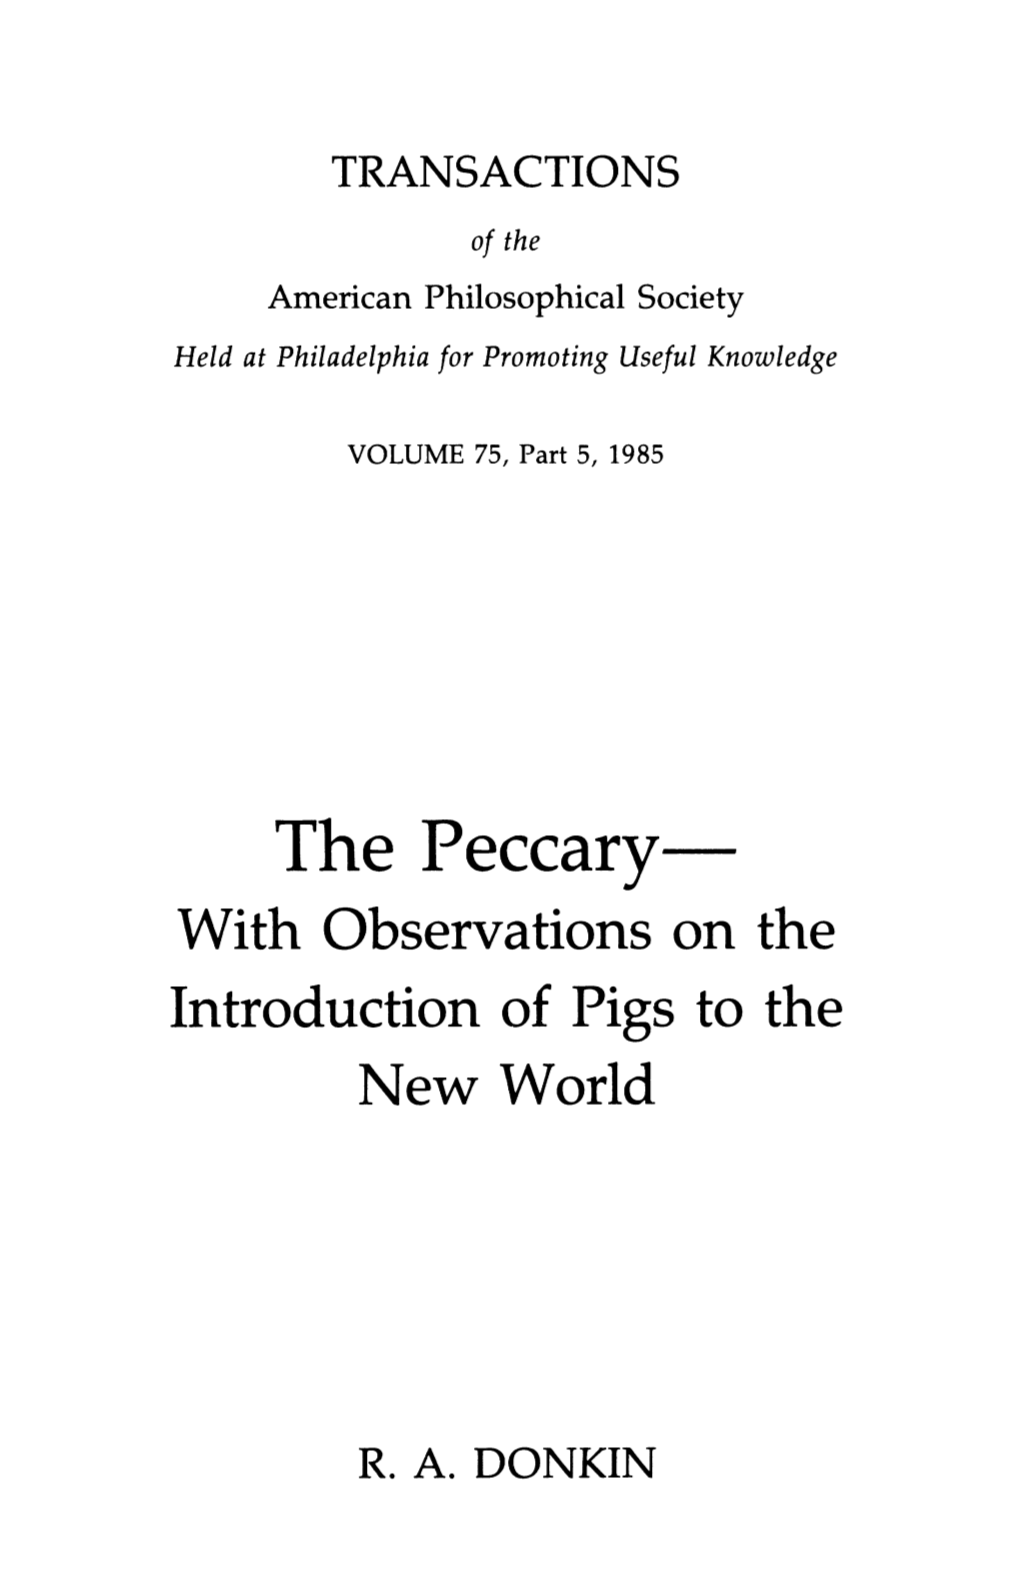 The Peccary with Observations on the Introduction of Pigs to the New World